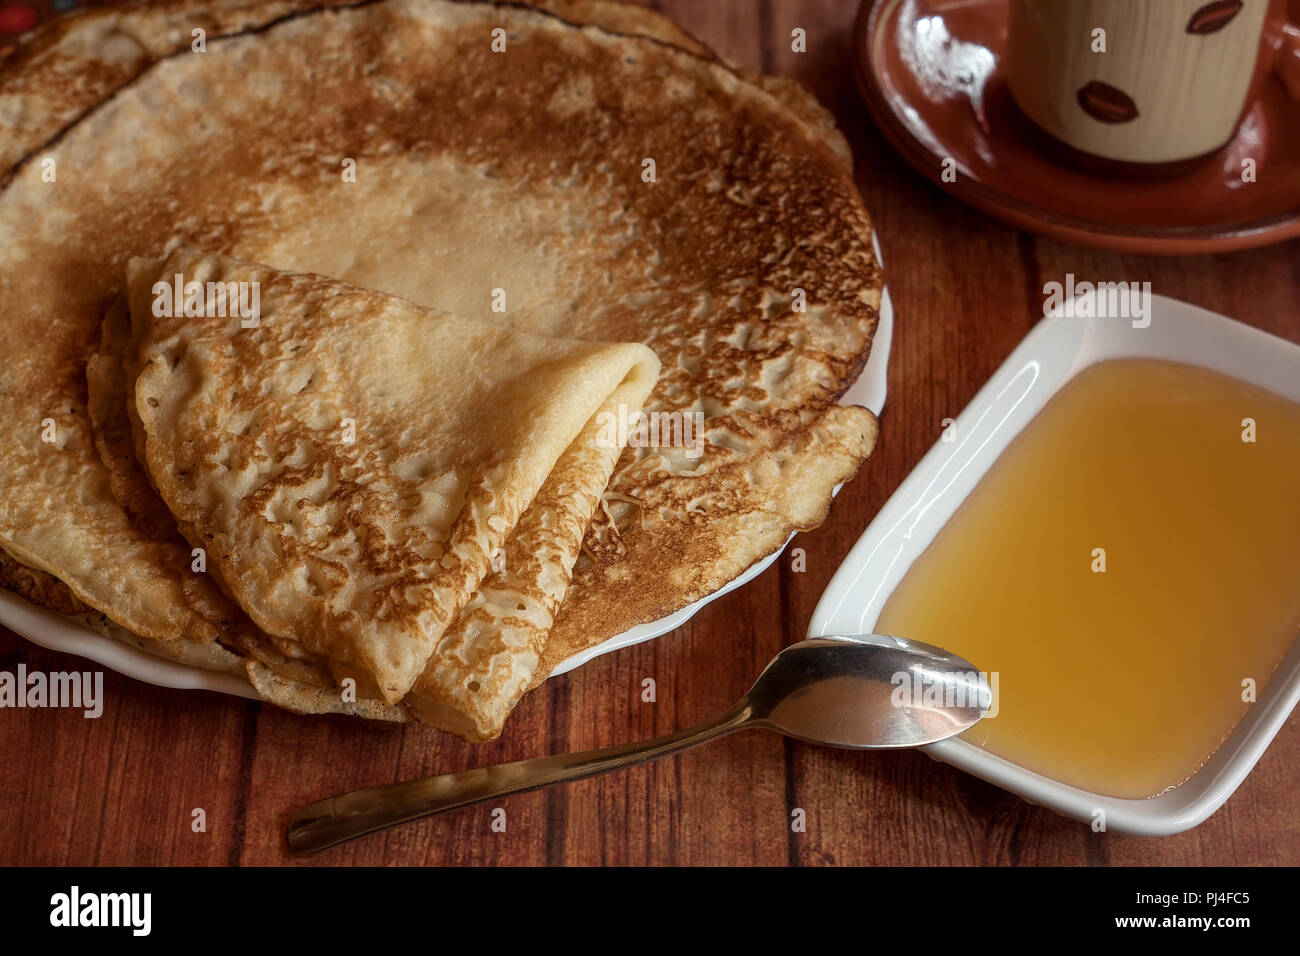 Breakfast pancakes served with honey on wooden table Stock Photo